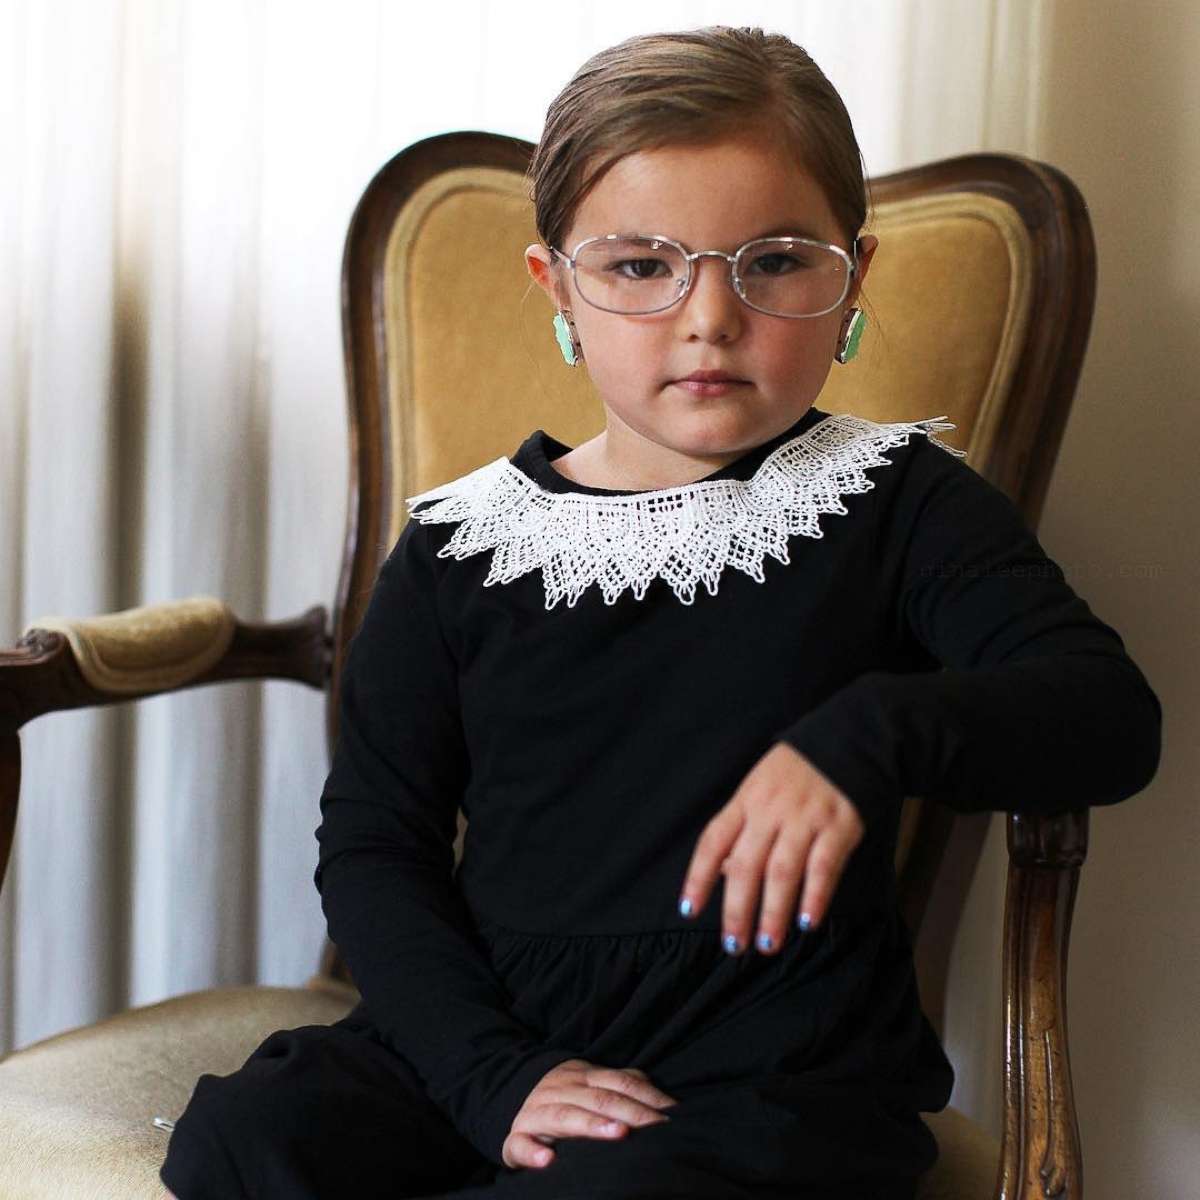 PHOTO: Photographer Gina Lee created a Ruth Bader Ginsburg costume for her 5-year-old daughter, Willow.